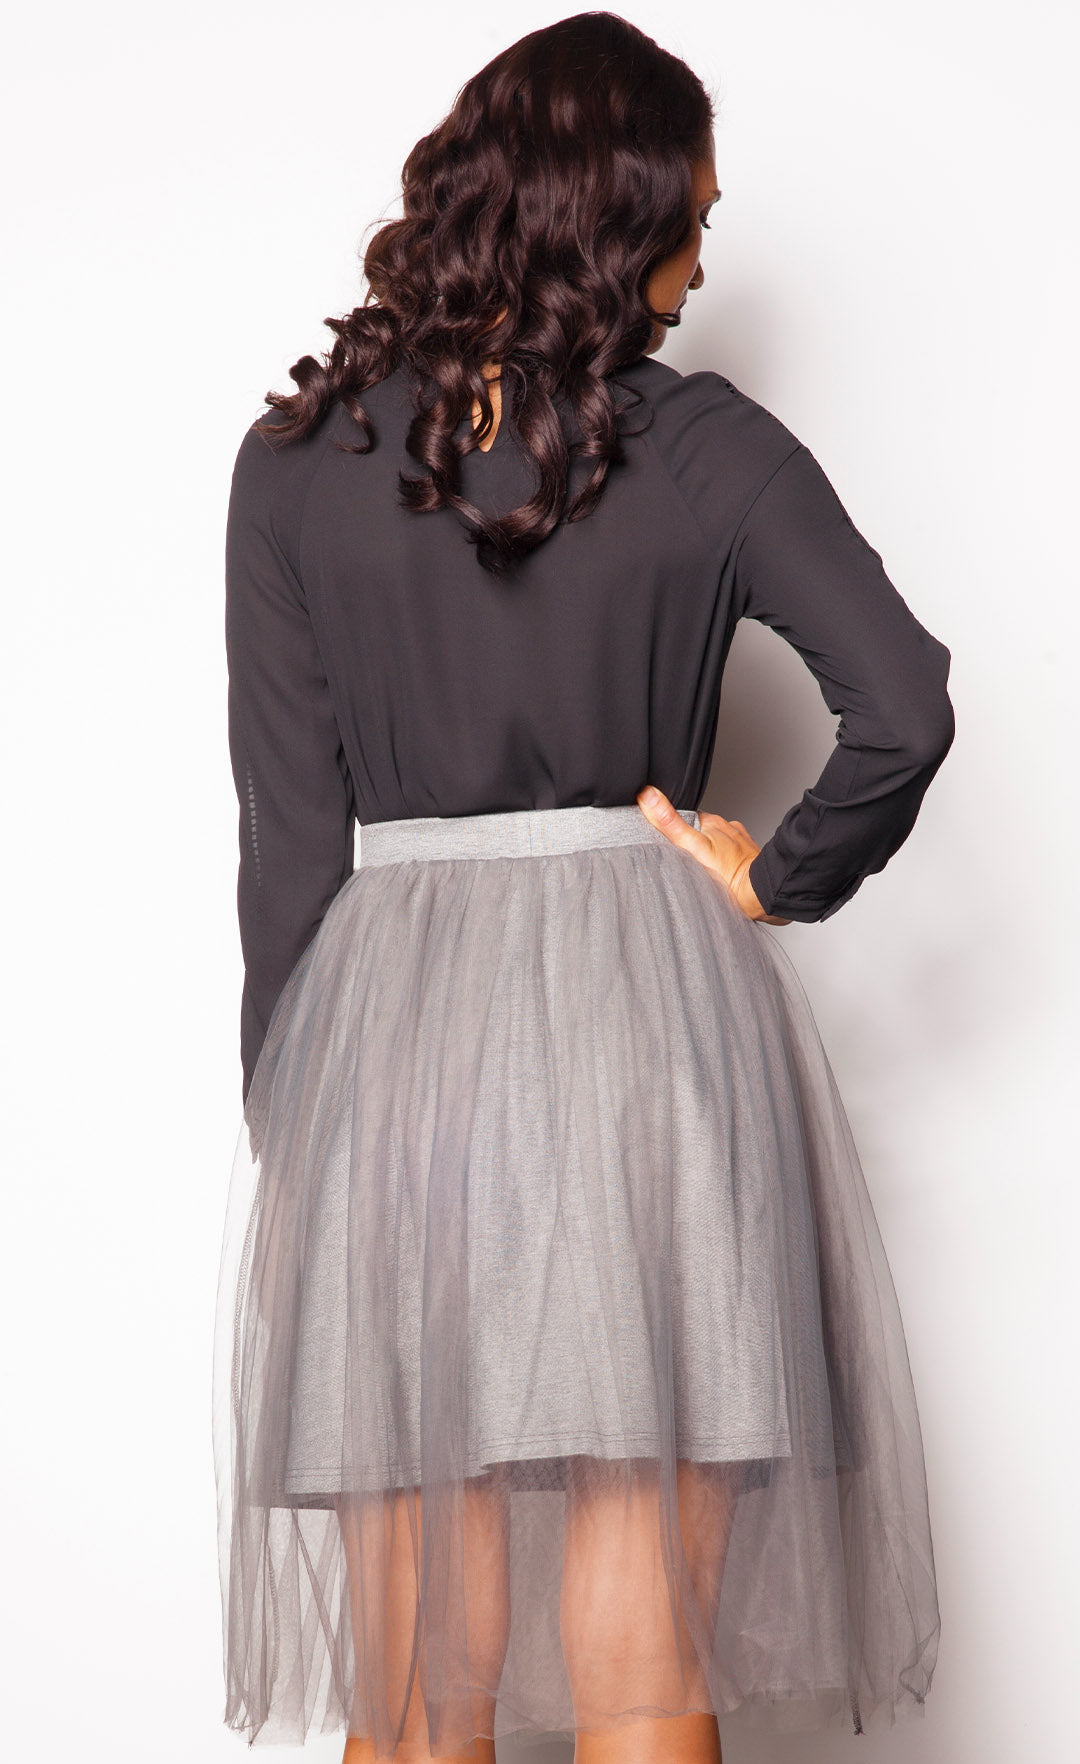 Dancing On Air Skirt - Pink Martini Collection